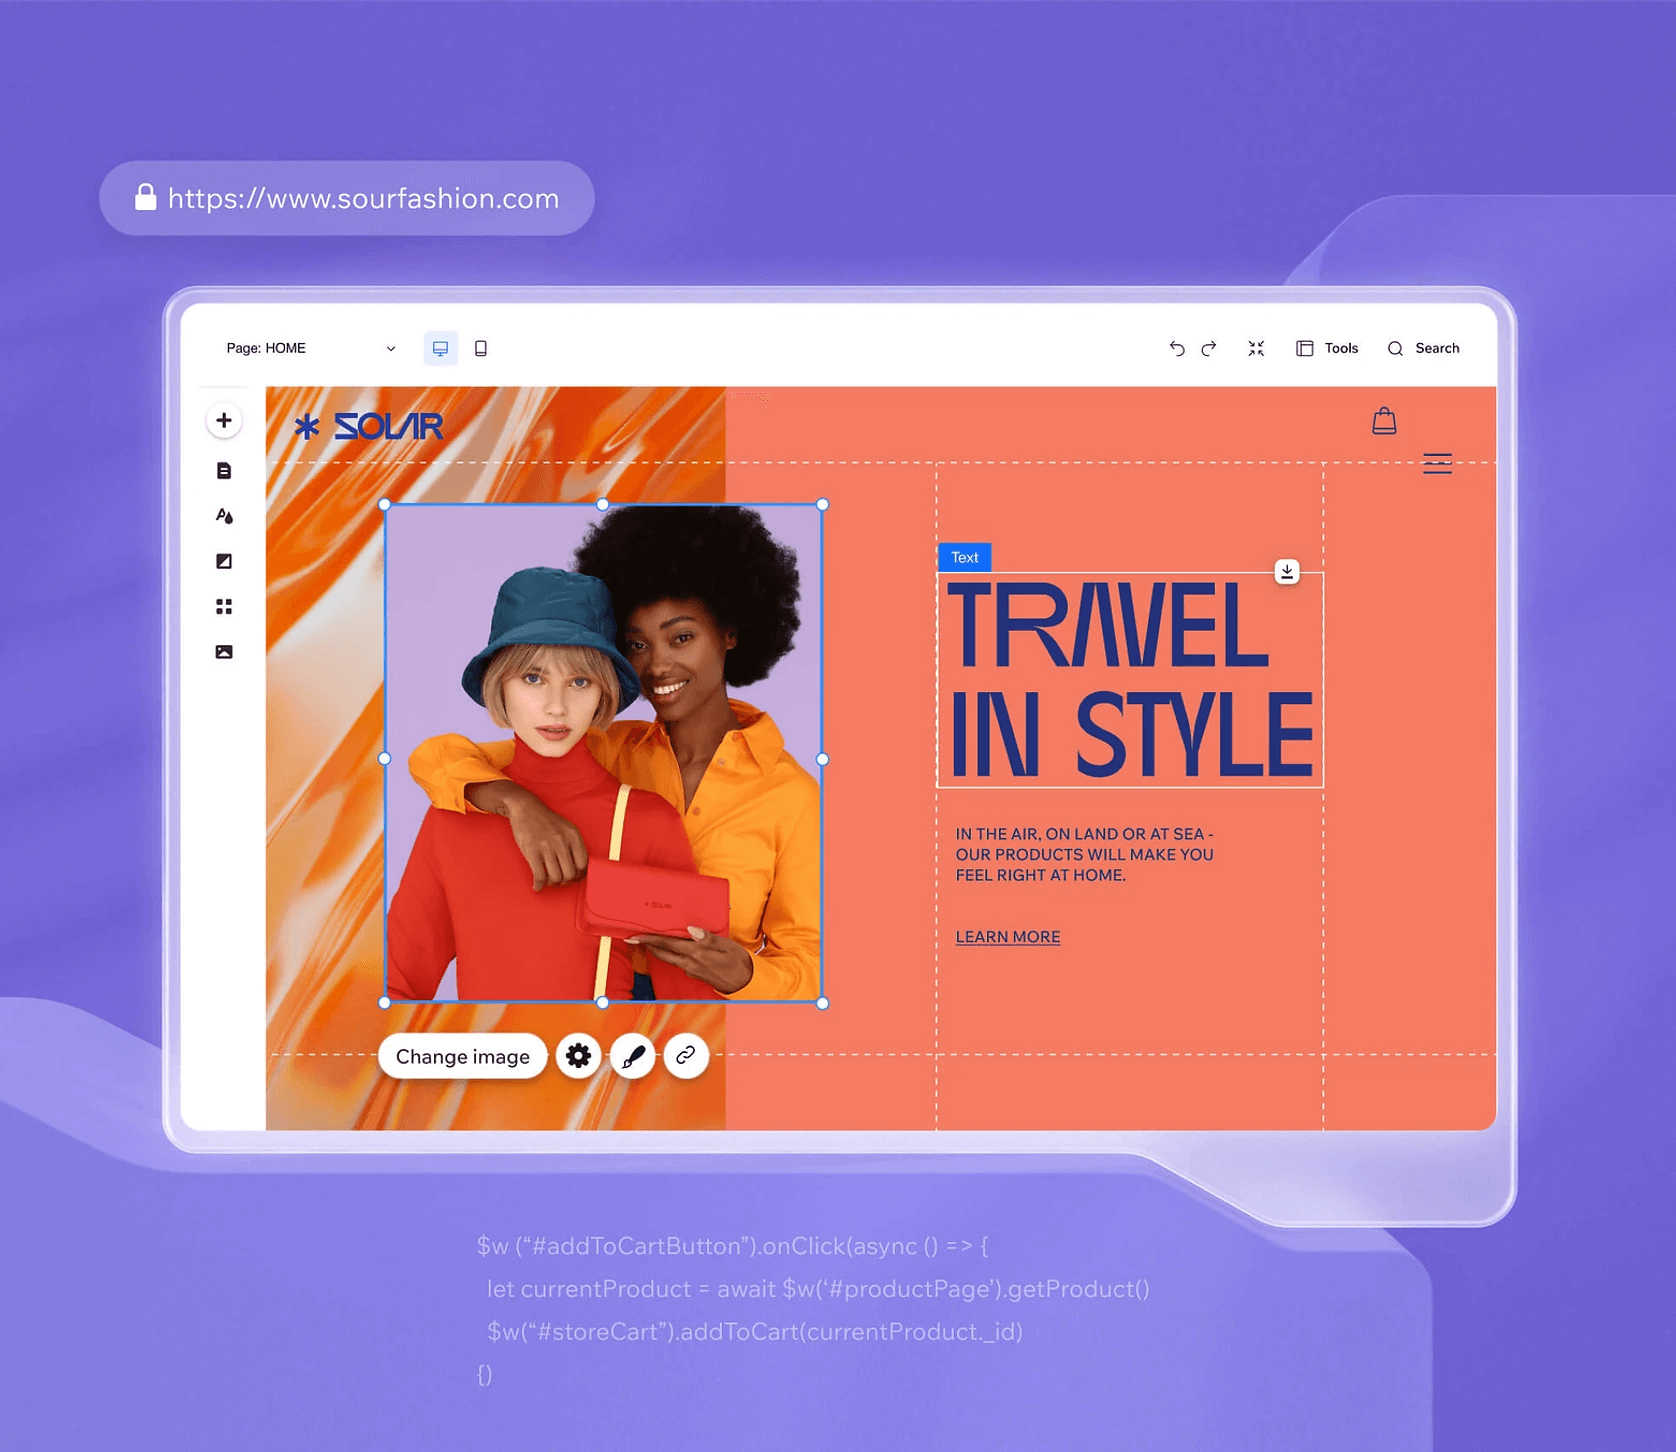 Editing a fashion website with a "Travel in Style" theme in Wix, featuring two models in colorful outfits and accessories.